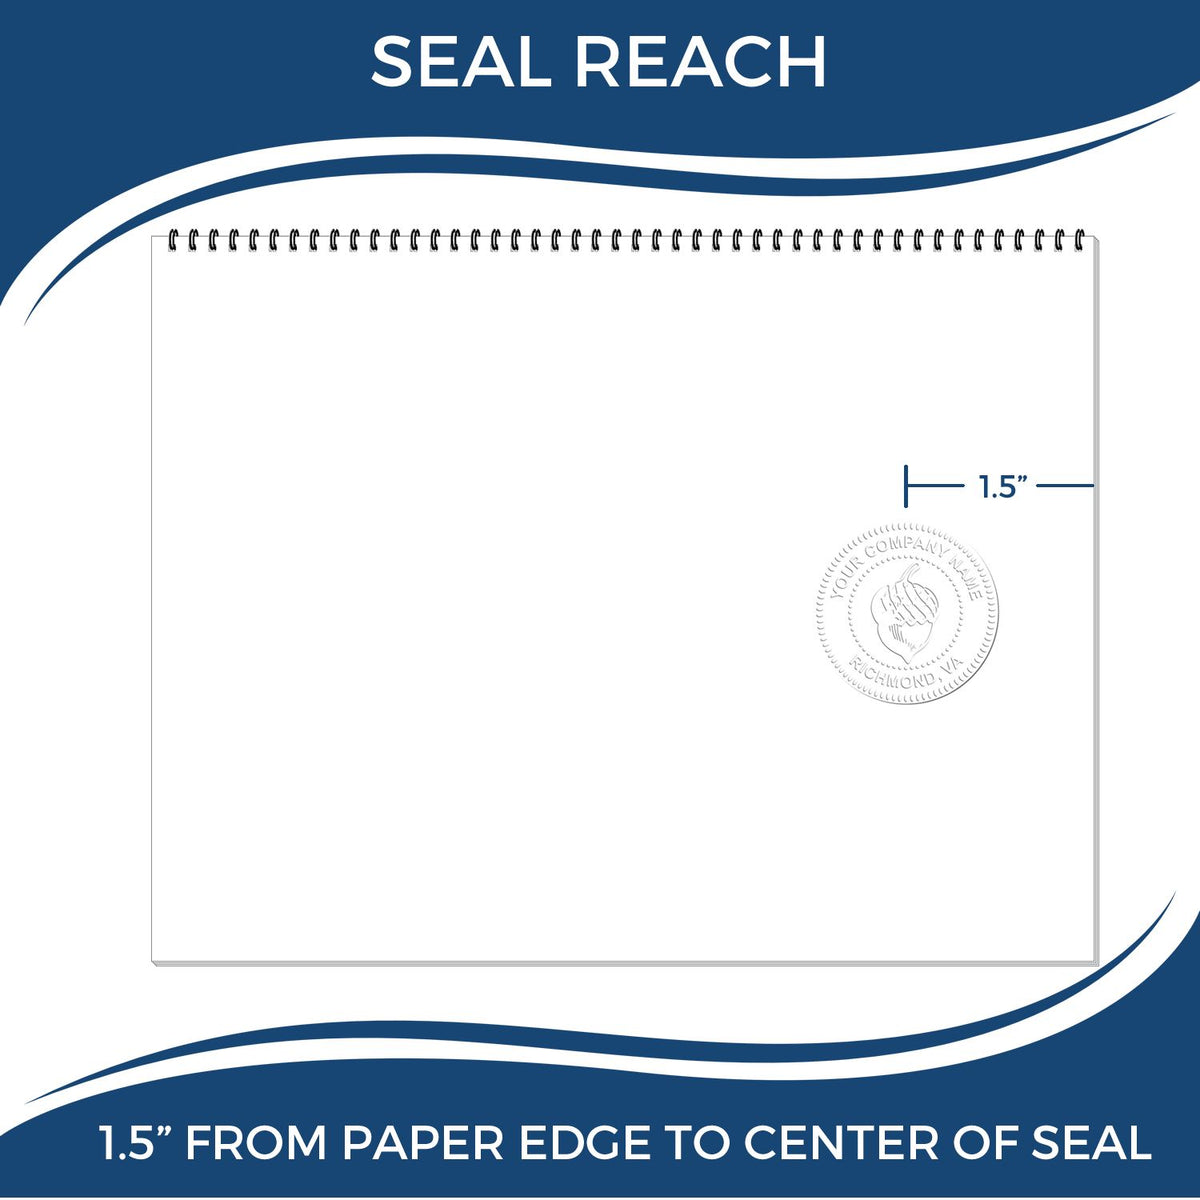 An infographic showing the seal reach which is represented by a ruler and a miniature seal image of the Soft Pocket Washington Landscape Architect Embosser